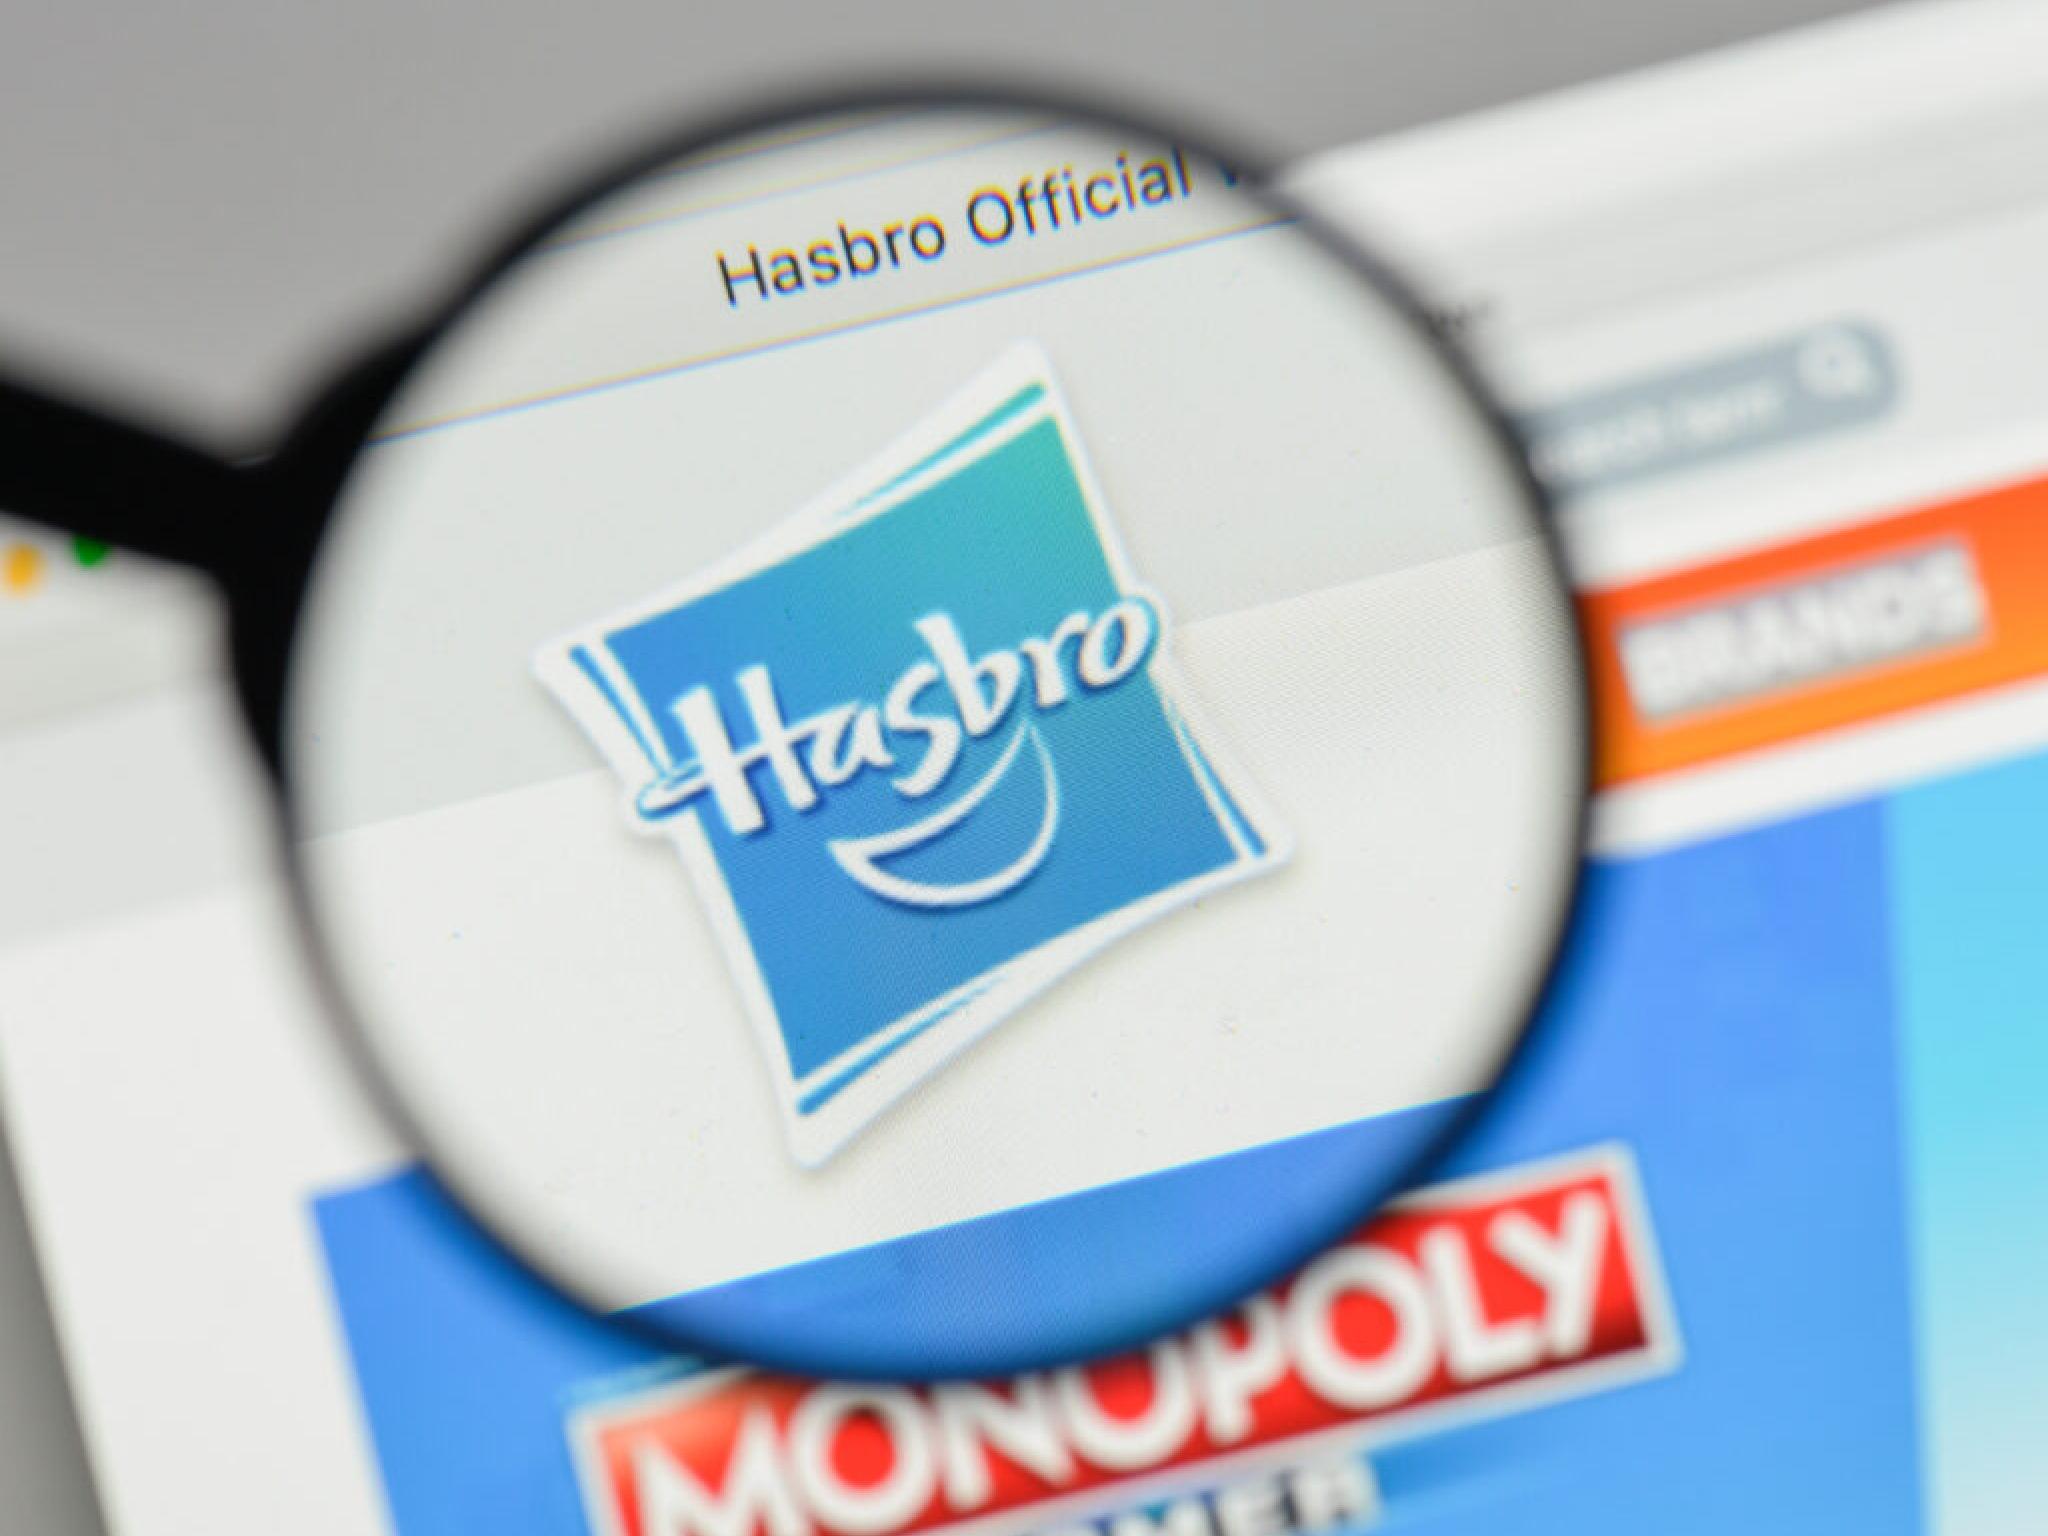  hasbro-secures-500m-in-bonds-as-part-of-strategic-turnaround 